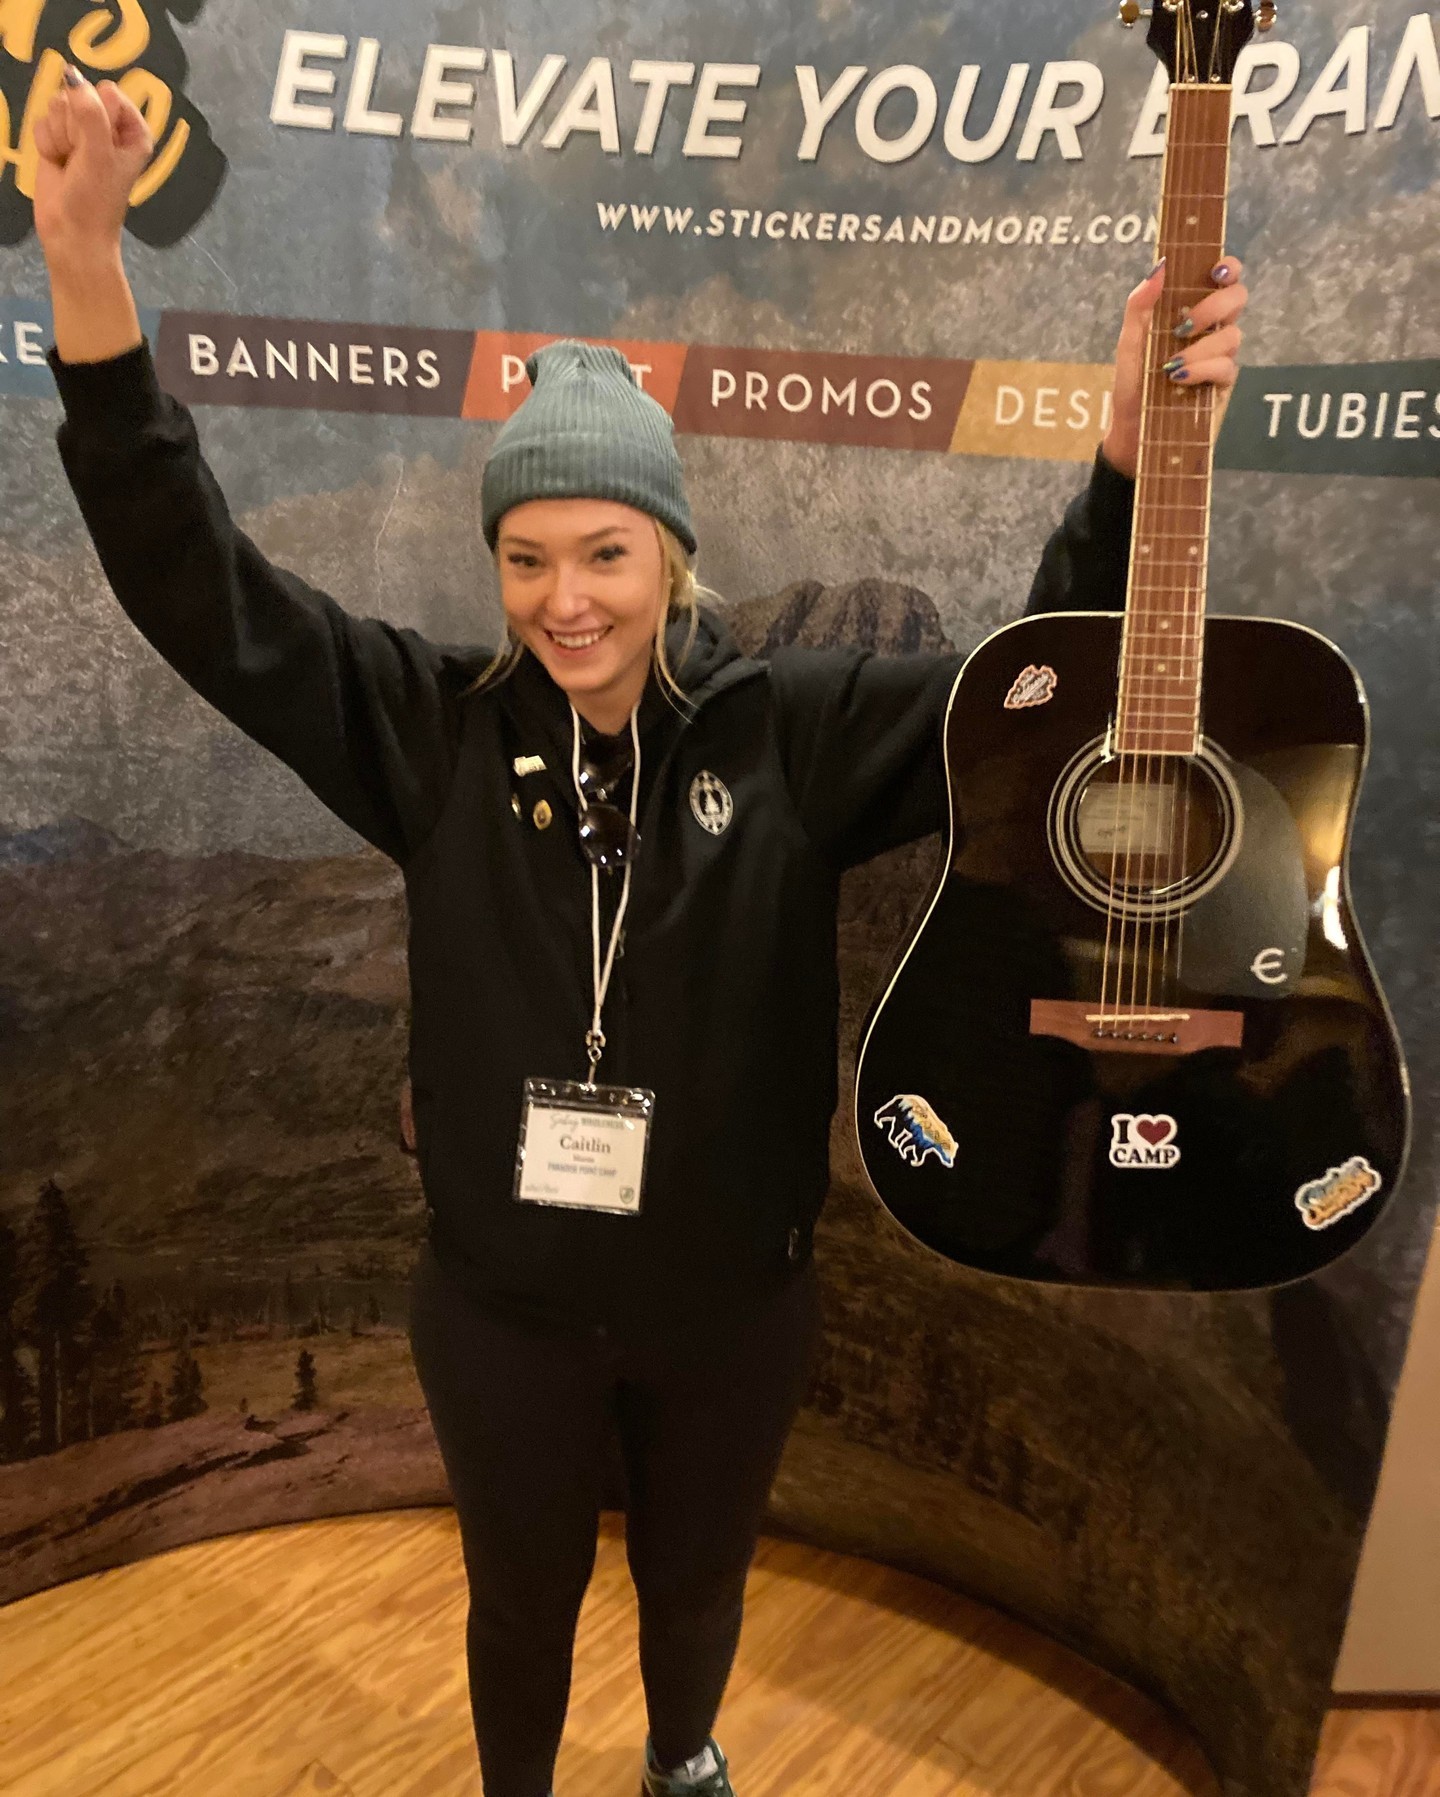 Another conference, another winner 😉

Congratulations to Caitlin Martin: Paradise Point 👏 🎸

#StickersAndMore
#ElevateYourBrand